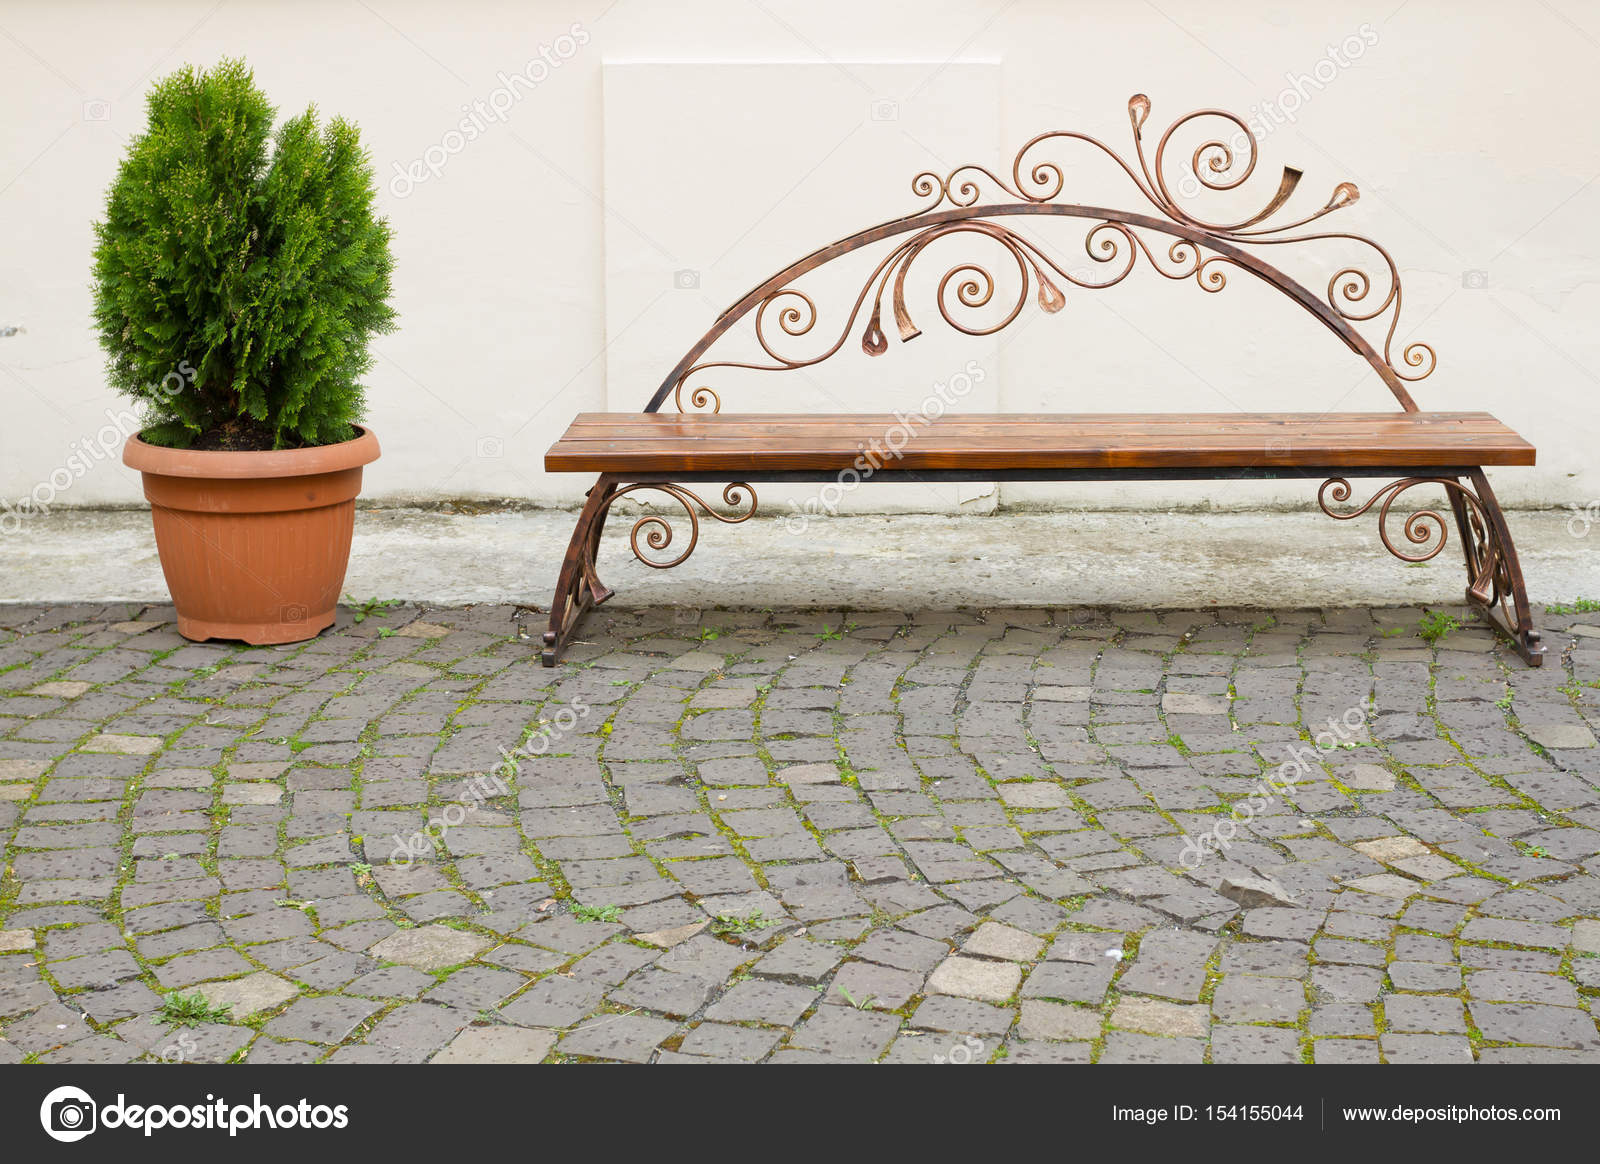 Decorative Bench And Flower Pot Stock Photo